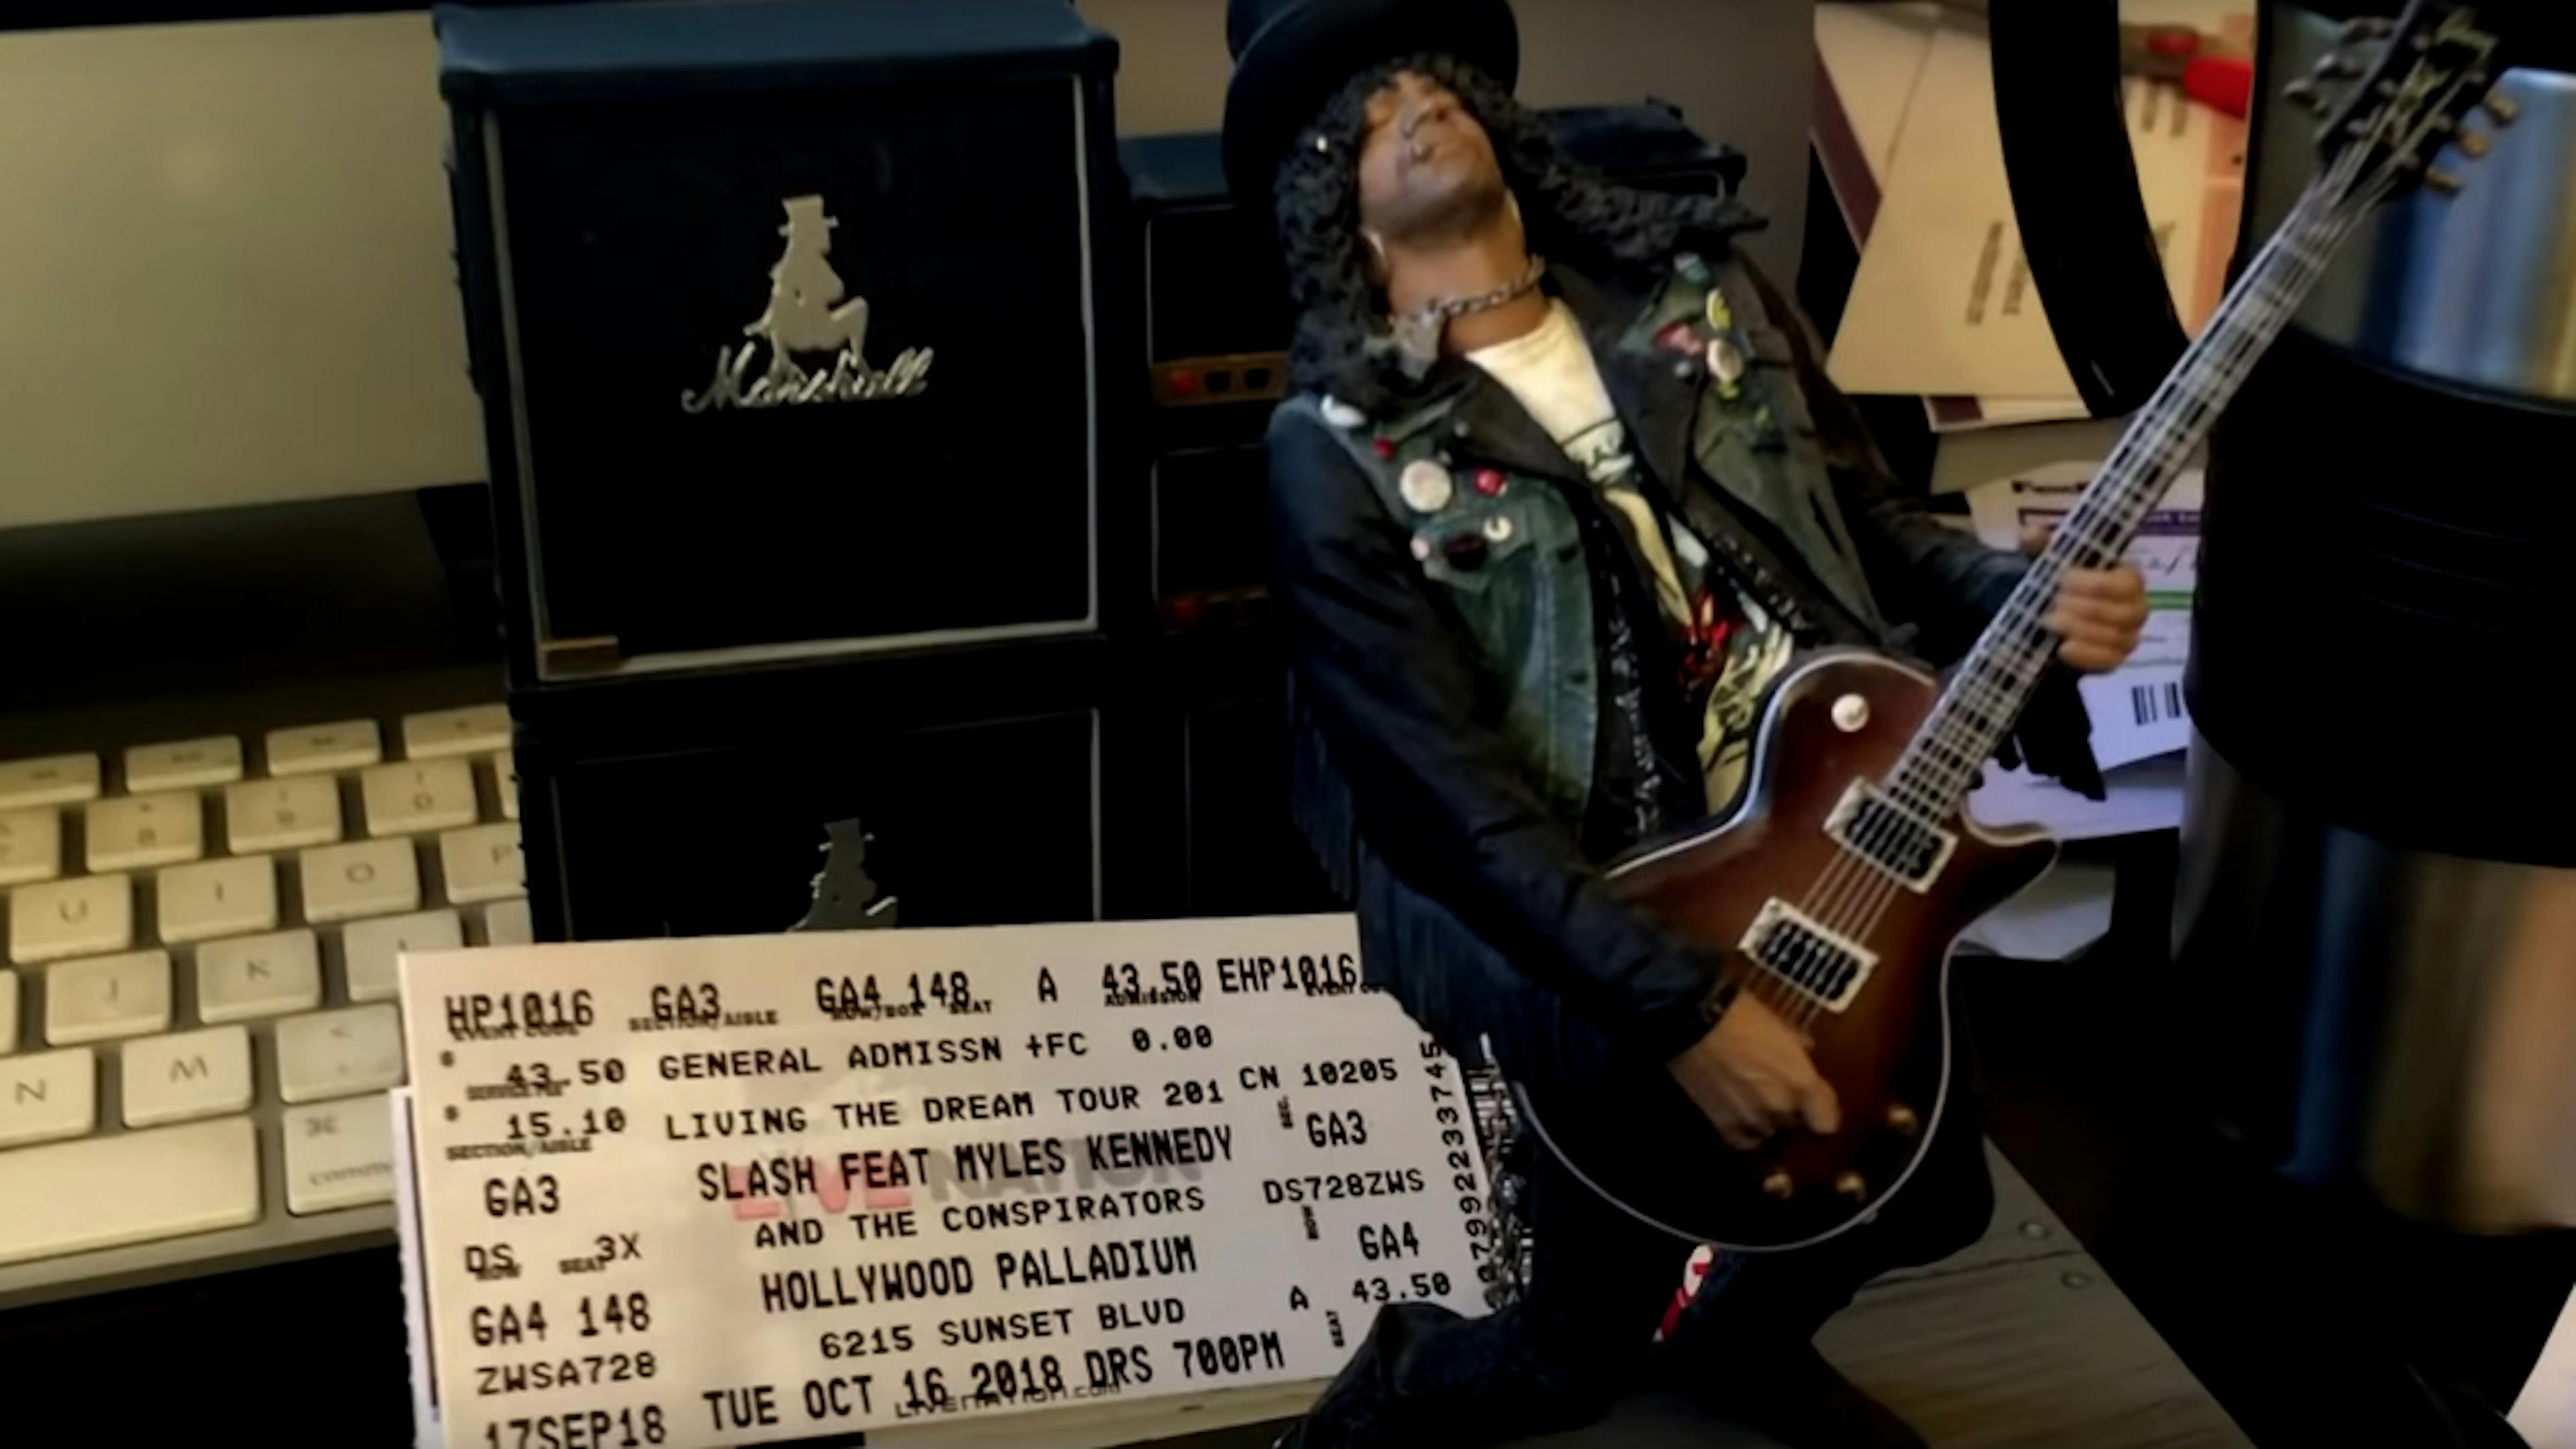 Slash ft Myles Kennedy & The Conspirators Drop New Video, Mind Your Manners